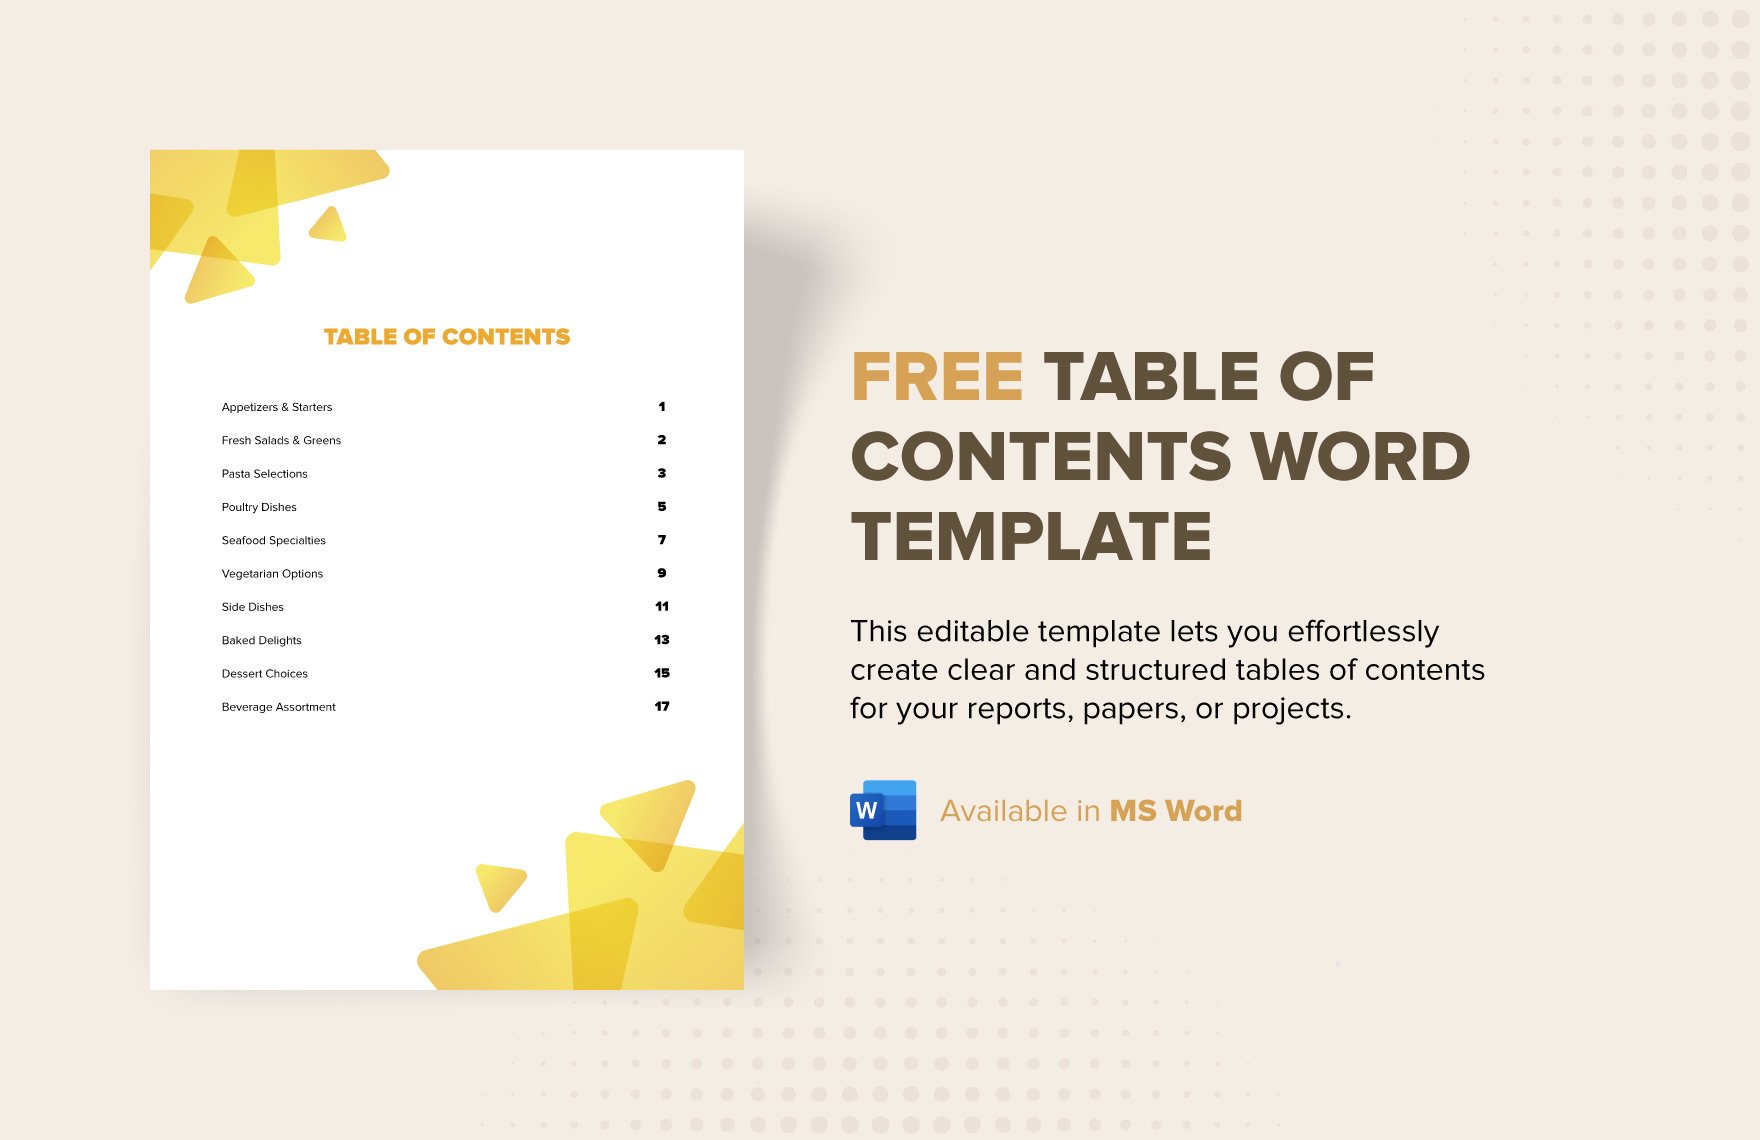 Free Table of Contents Word Template in Word